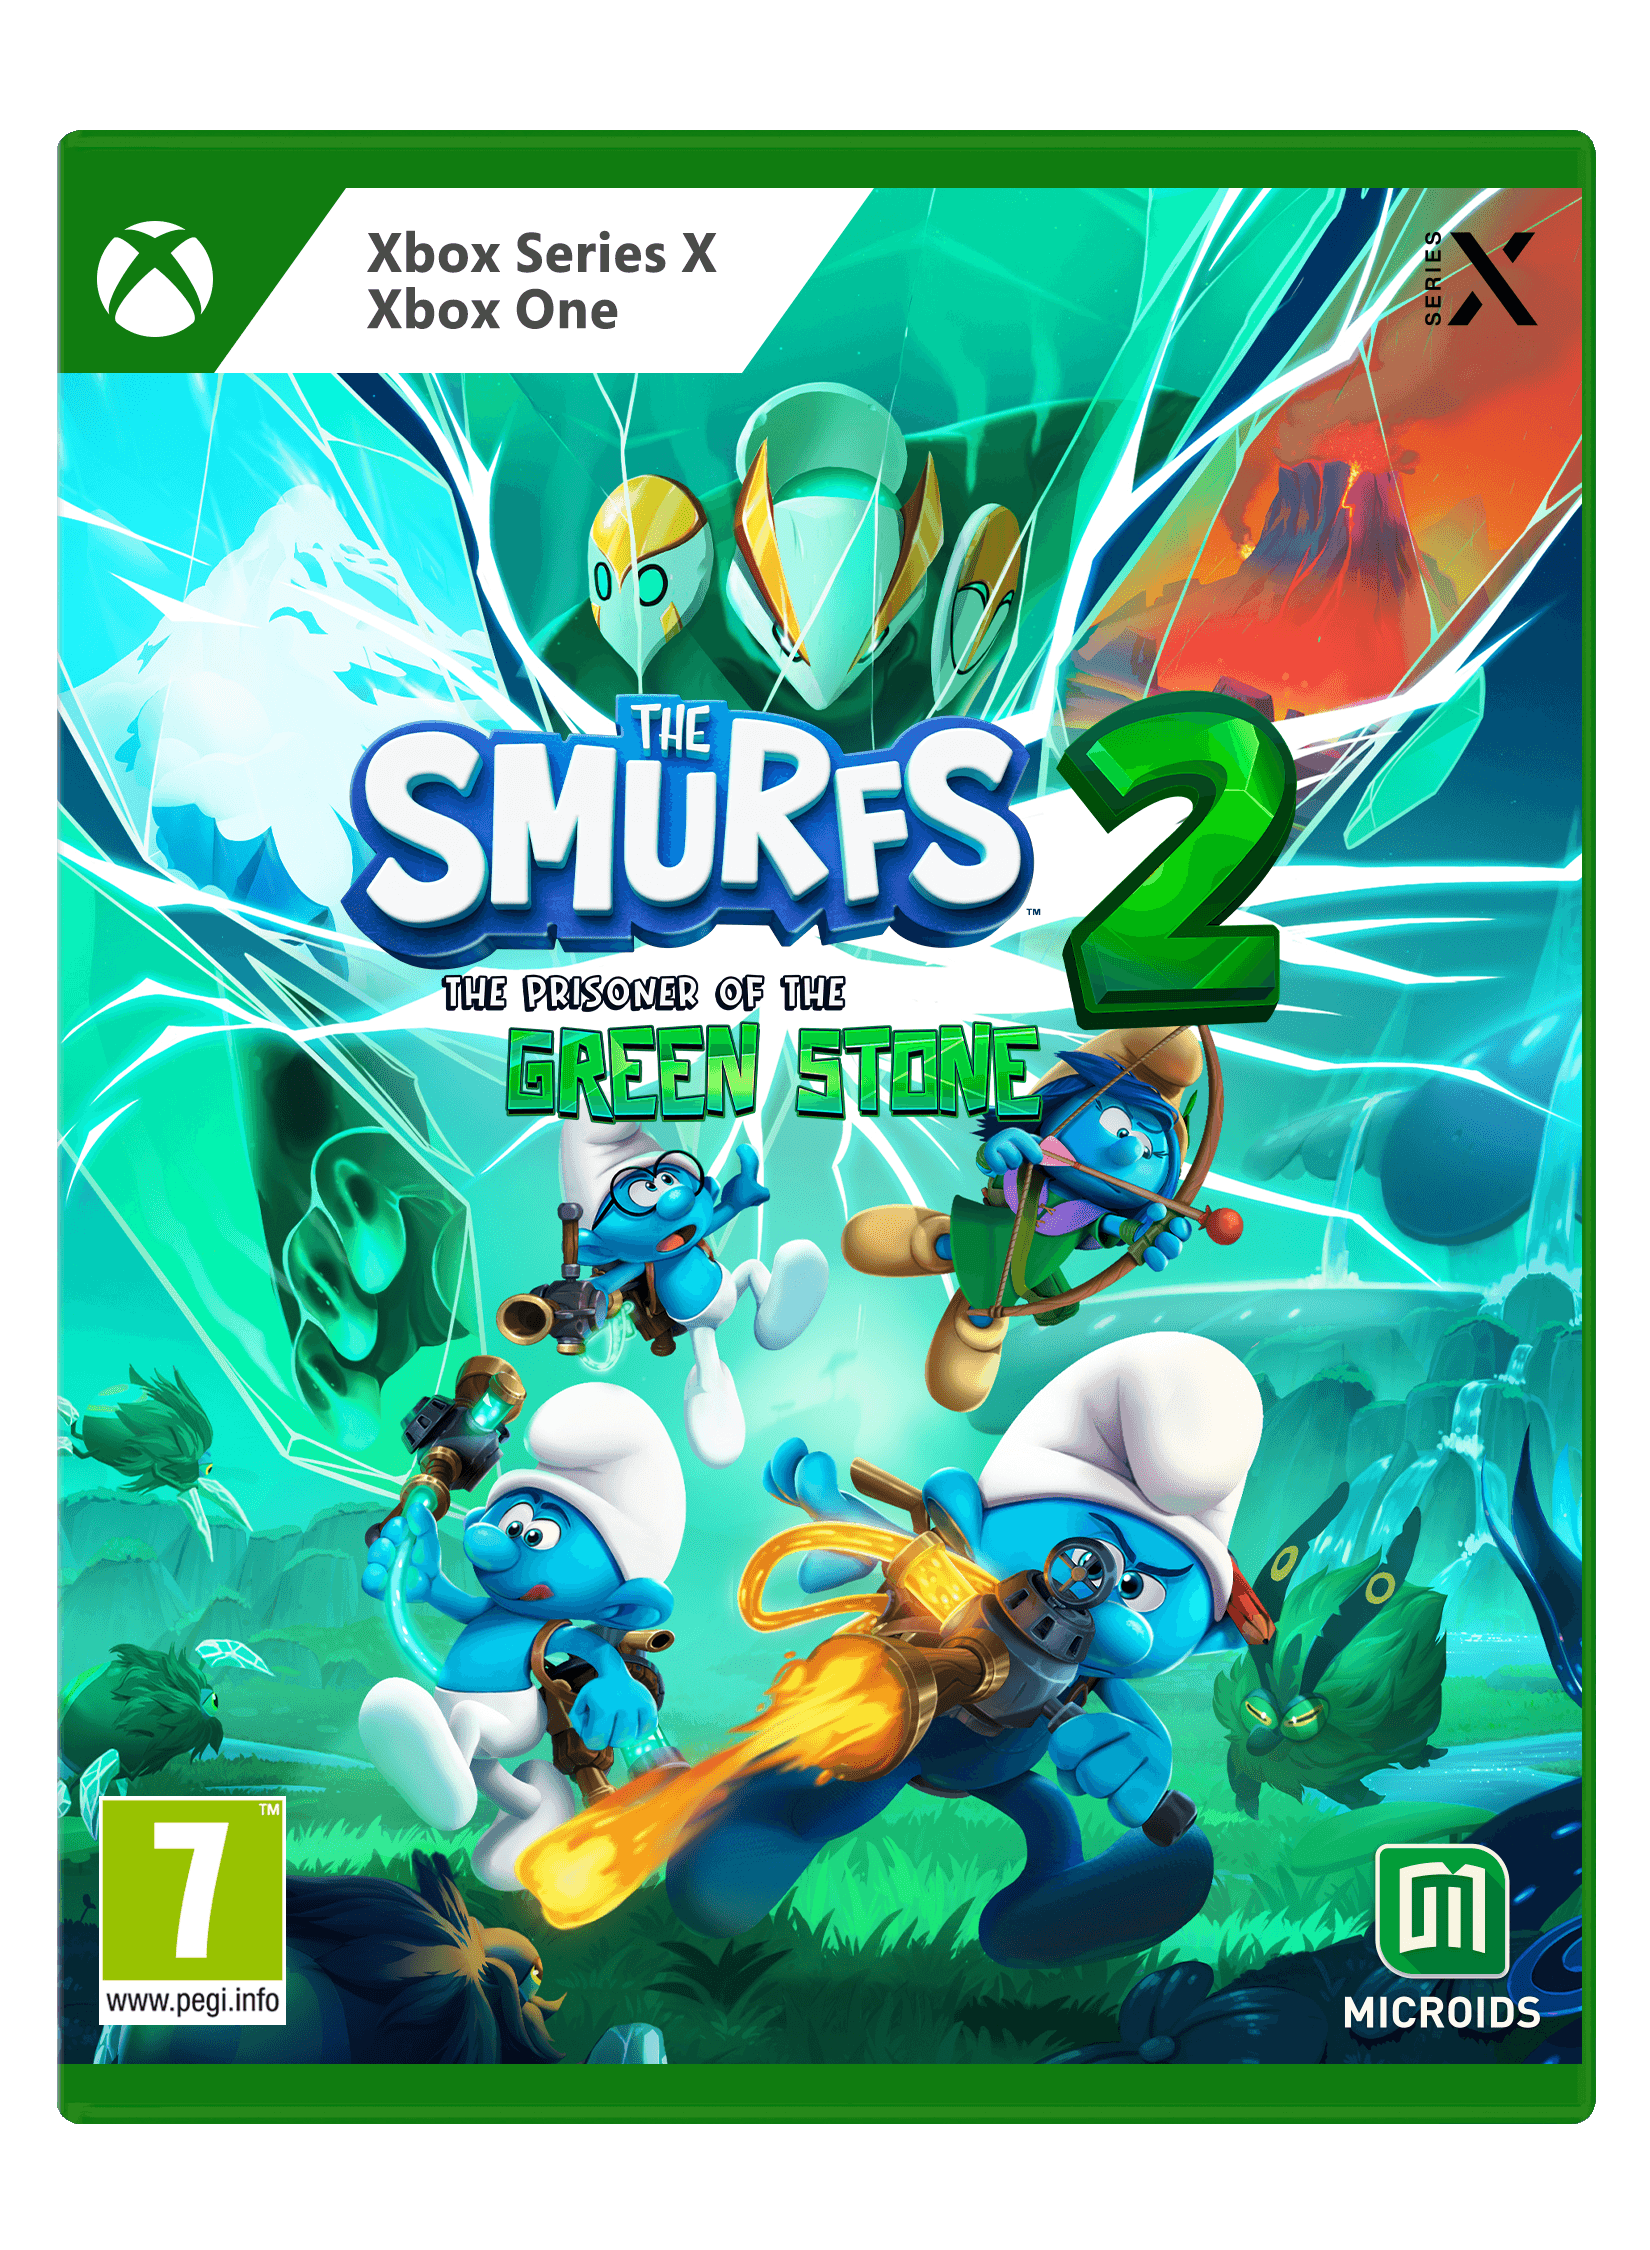 Xbox-The Smurfs 2: Prisoner of the Green Stone - Want a New Gadget